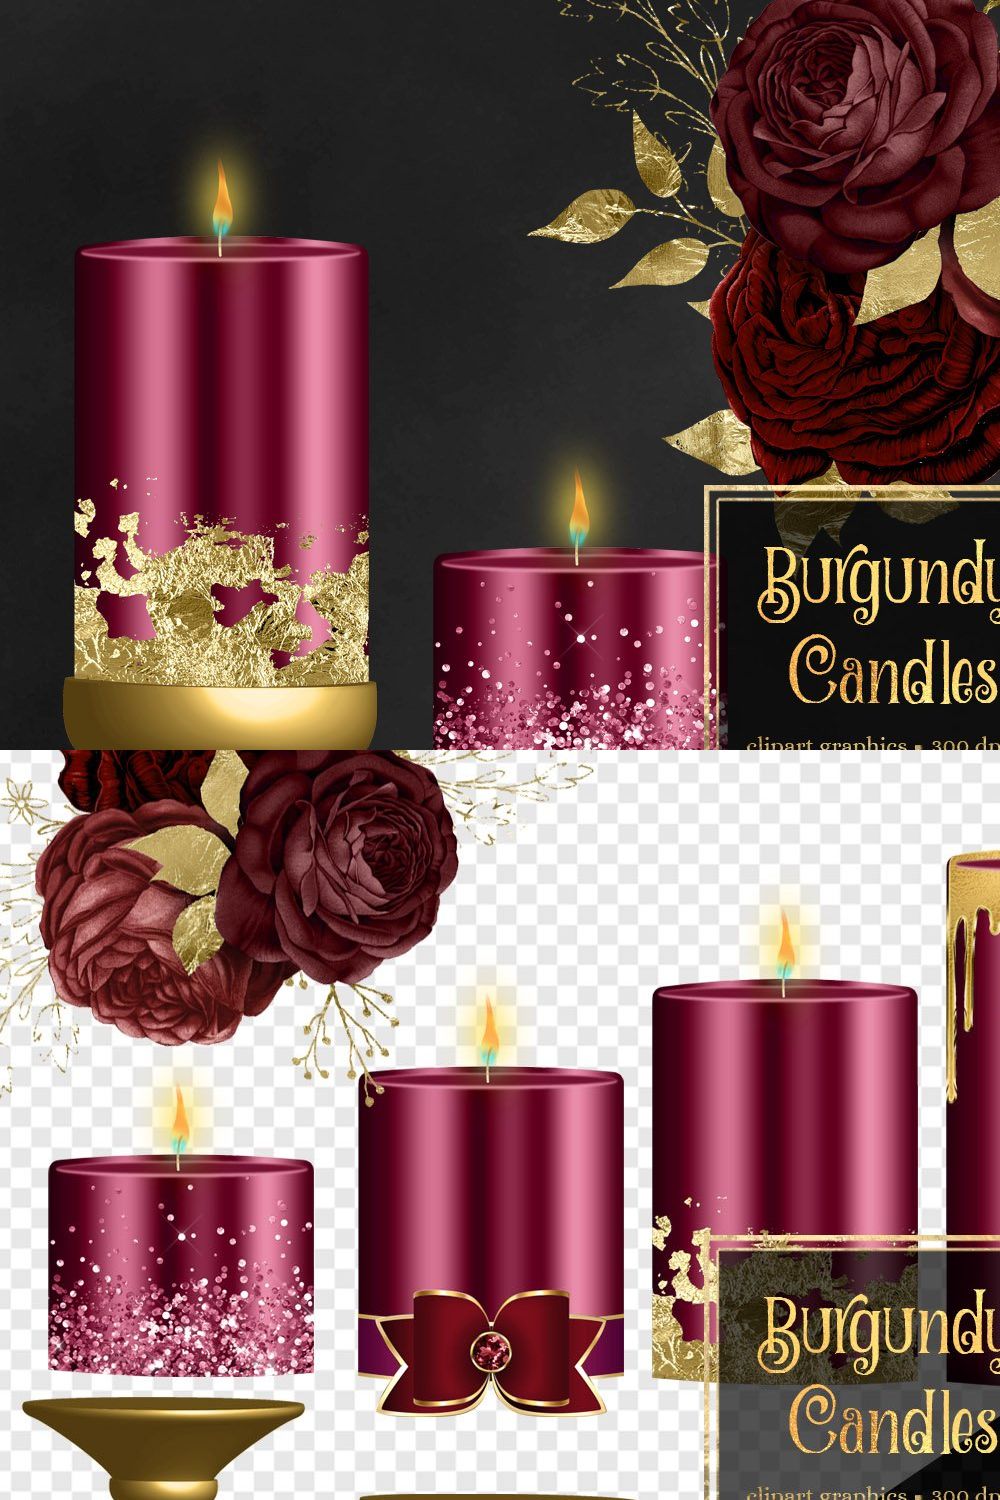 Burgundy and Gold Candle Clipart pinterest preview image.